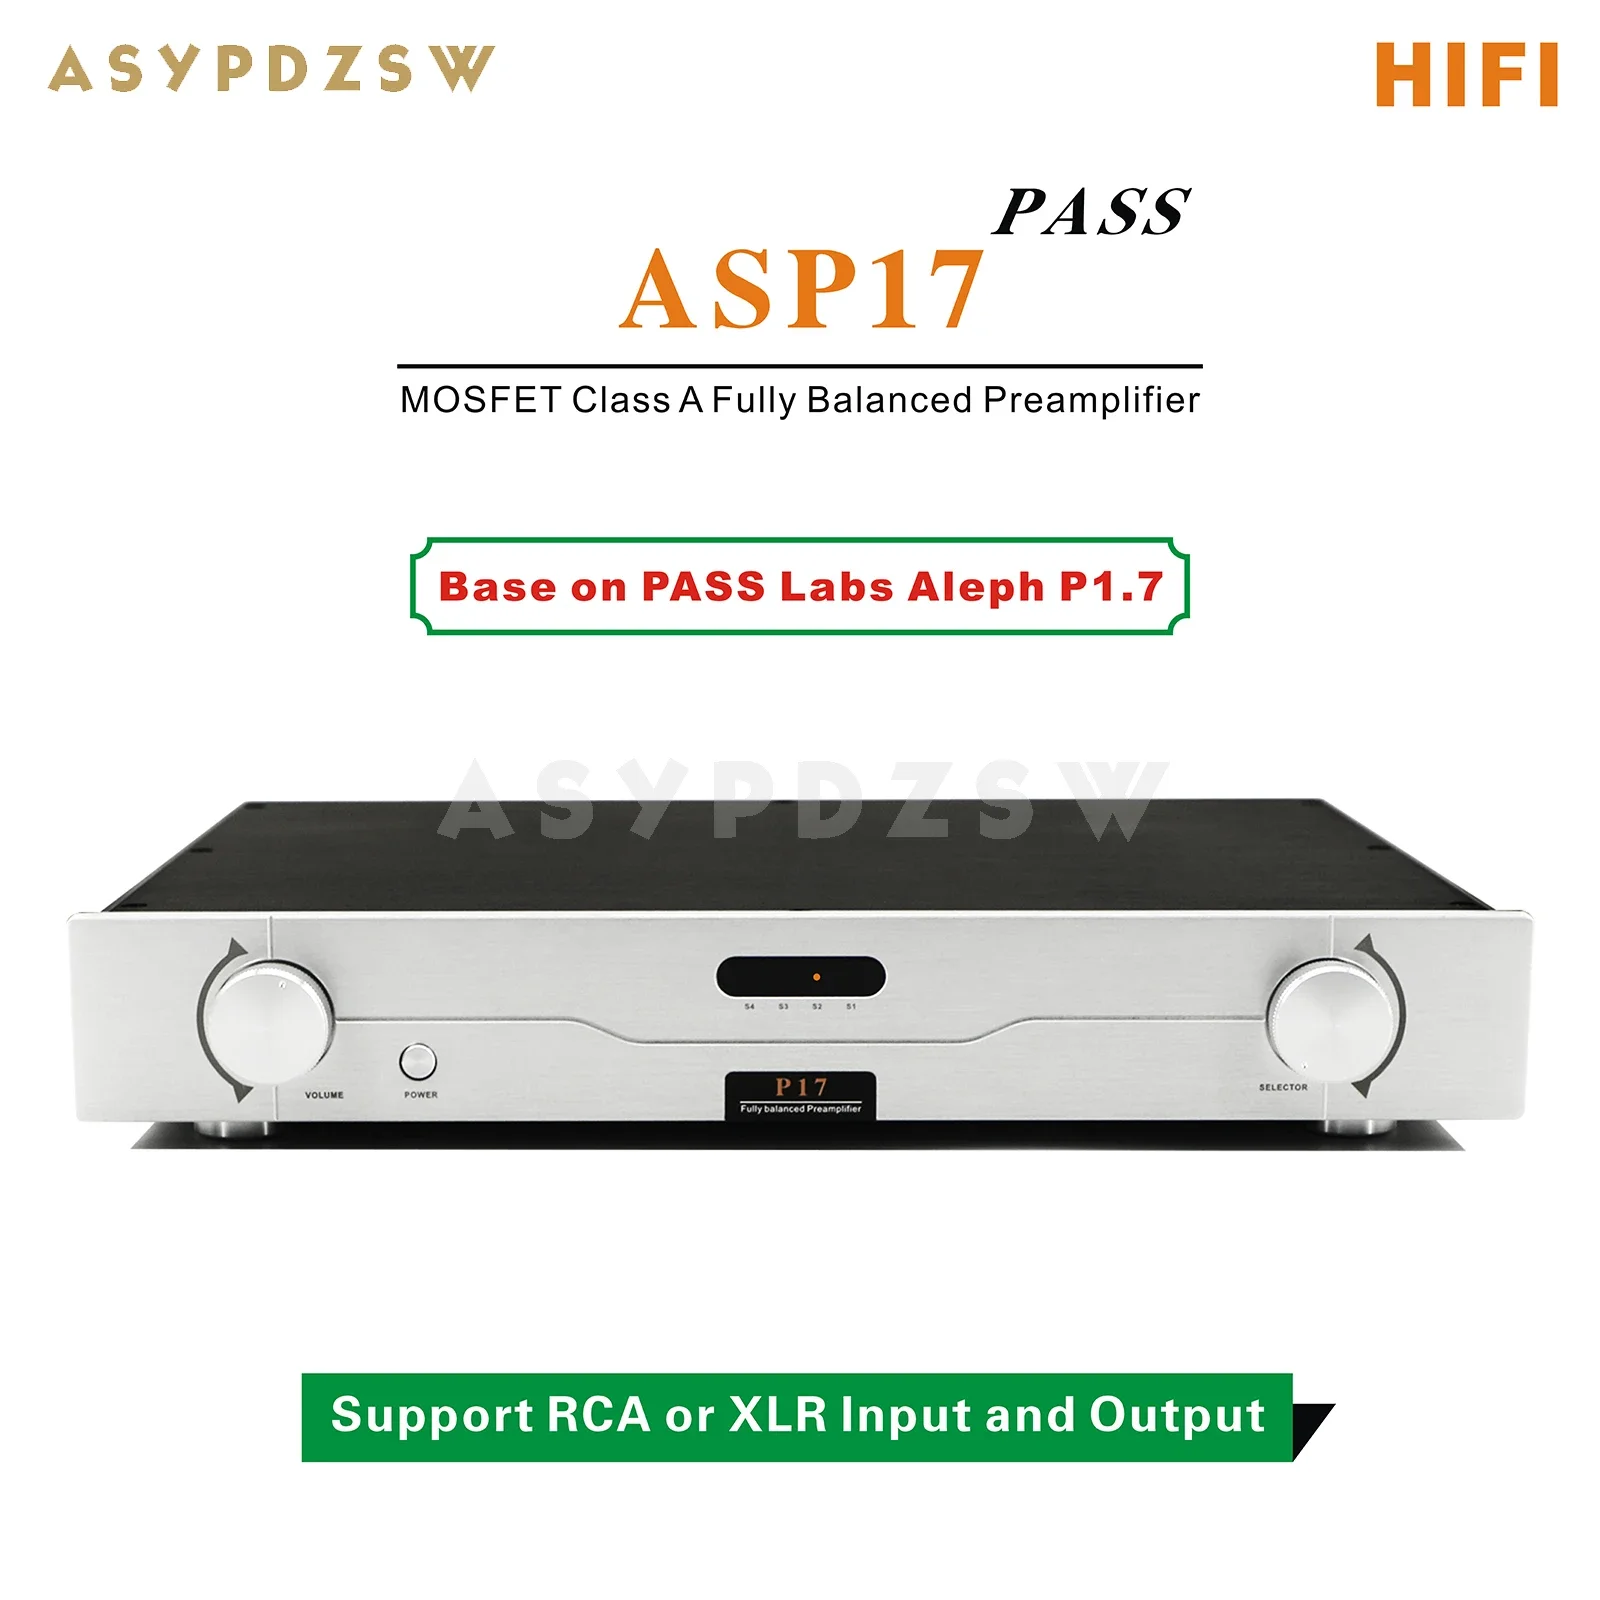 

ASYPDZSW HIFI Stereo ASP17 MOSFET Class A Fully Balanced Preamplifier Base on PASS P1.7 circuit